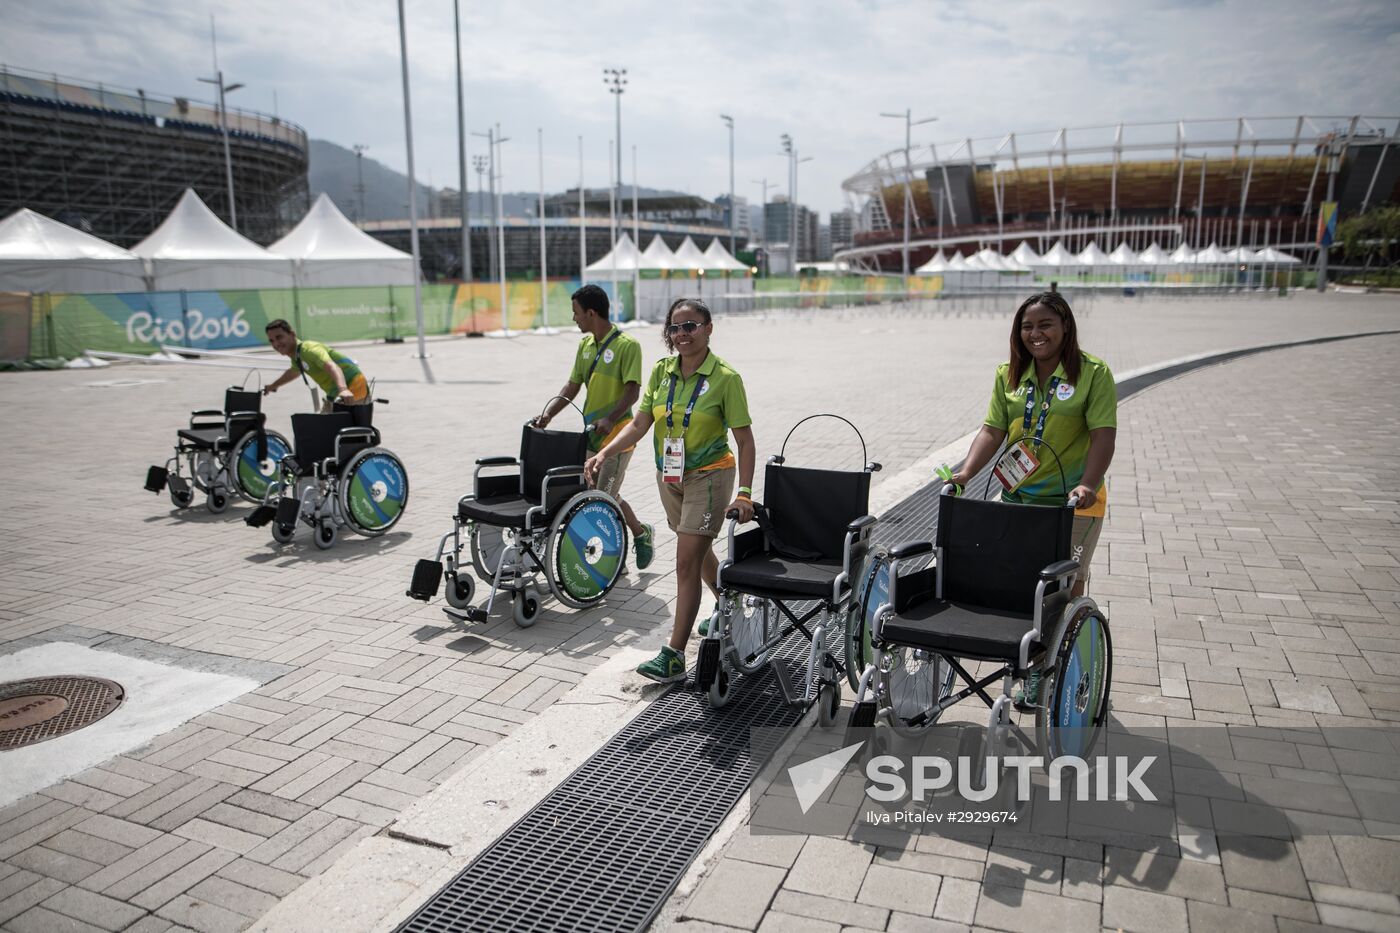 Preparations for Paralympic Games in Rio de Janeiro